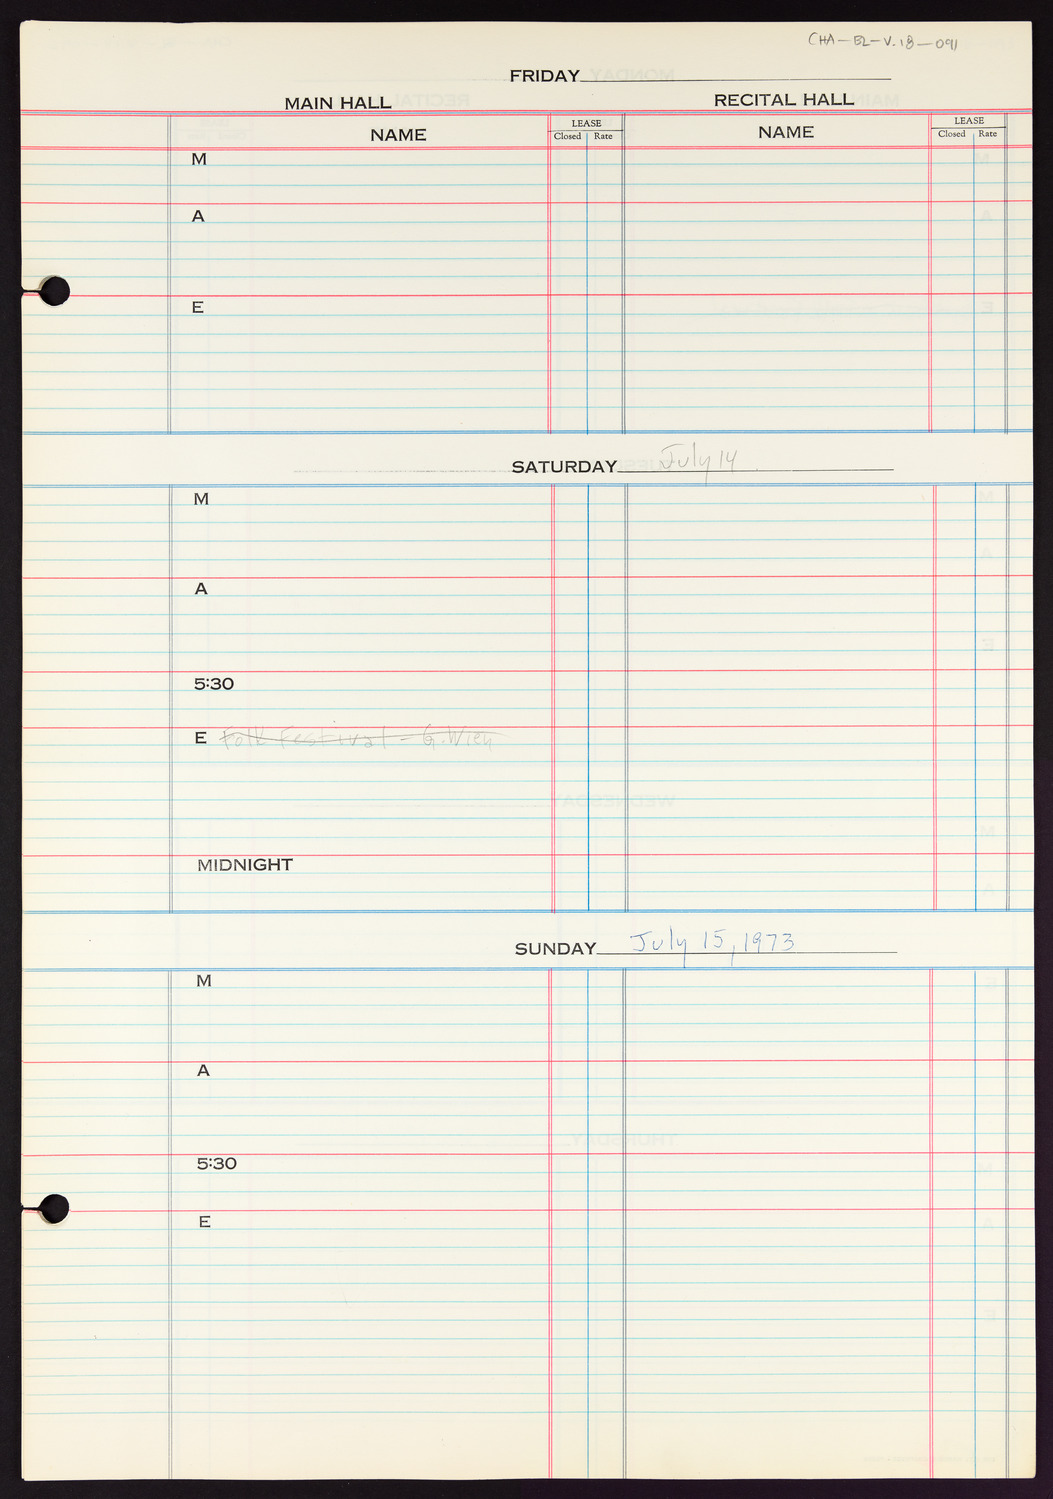 Carnegie Hall Booking Ledger, volume 18, page 91